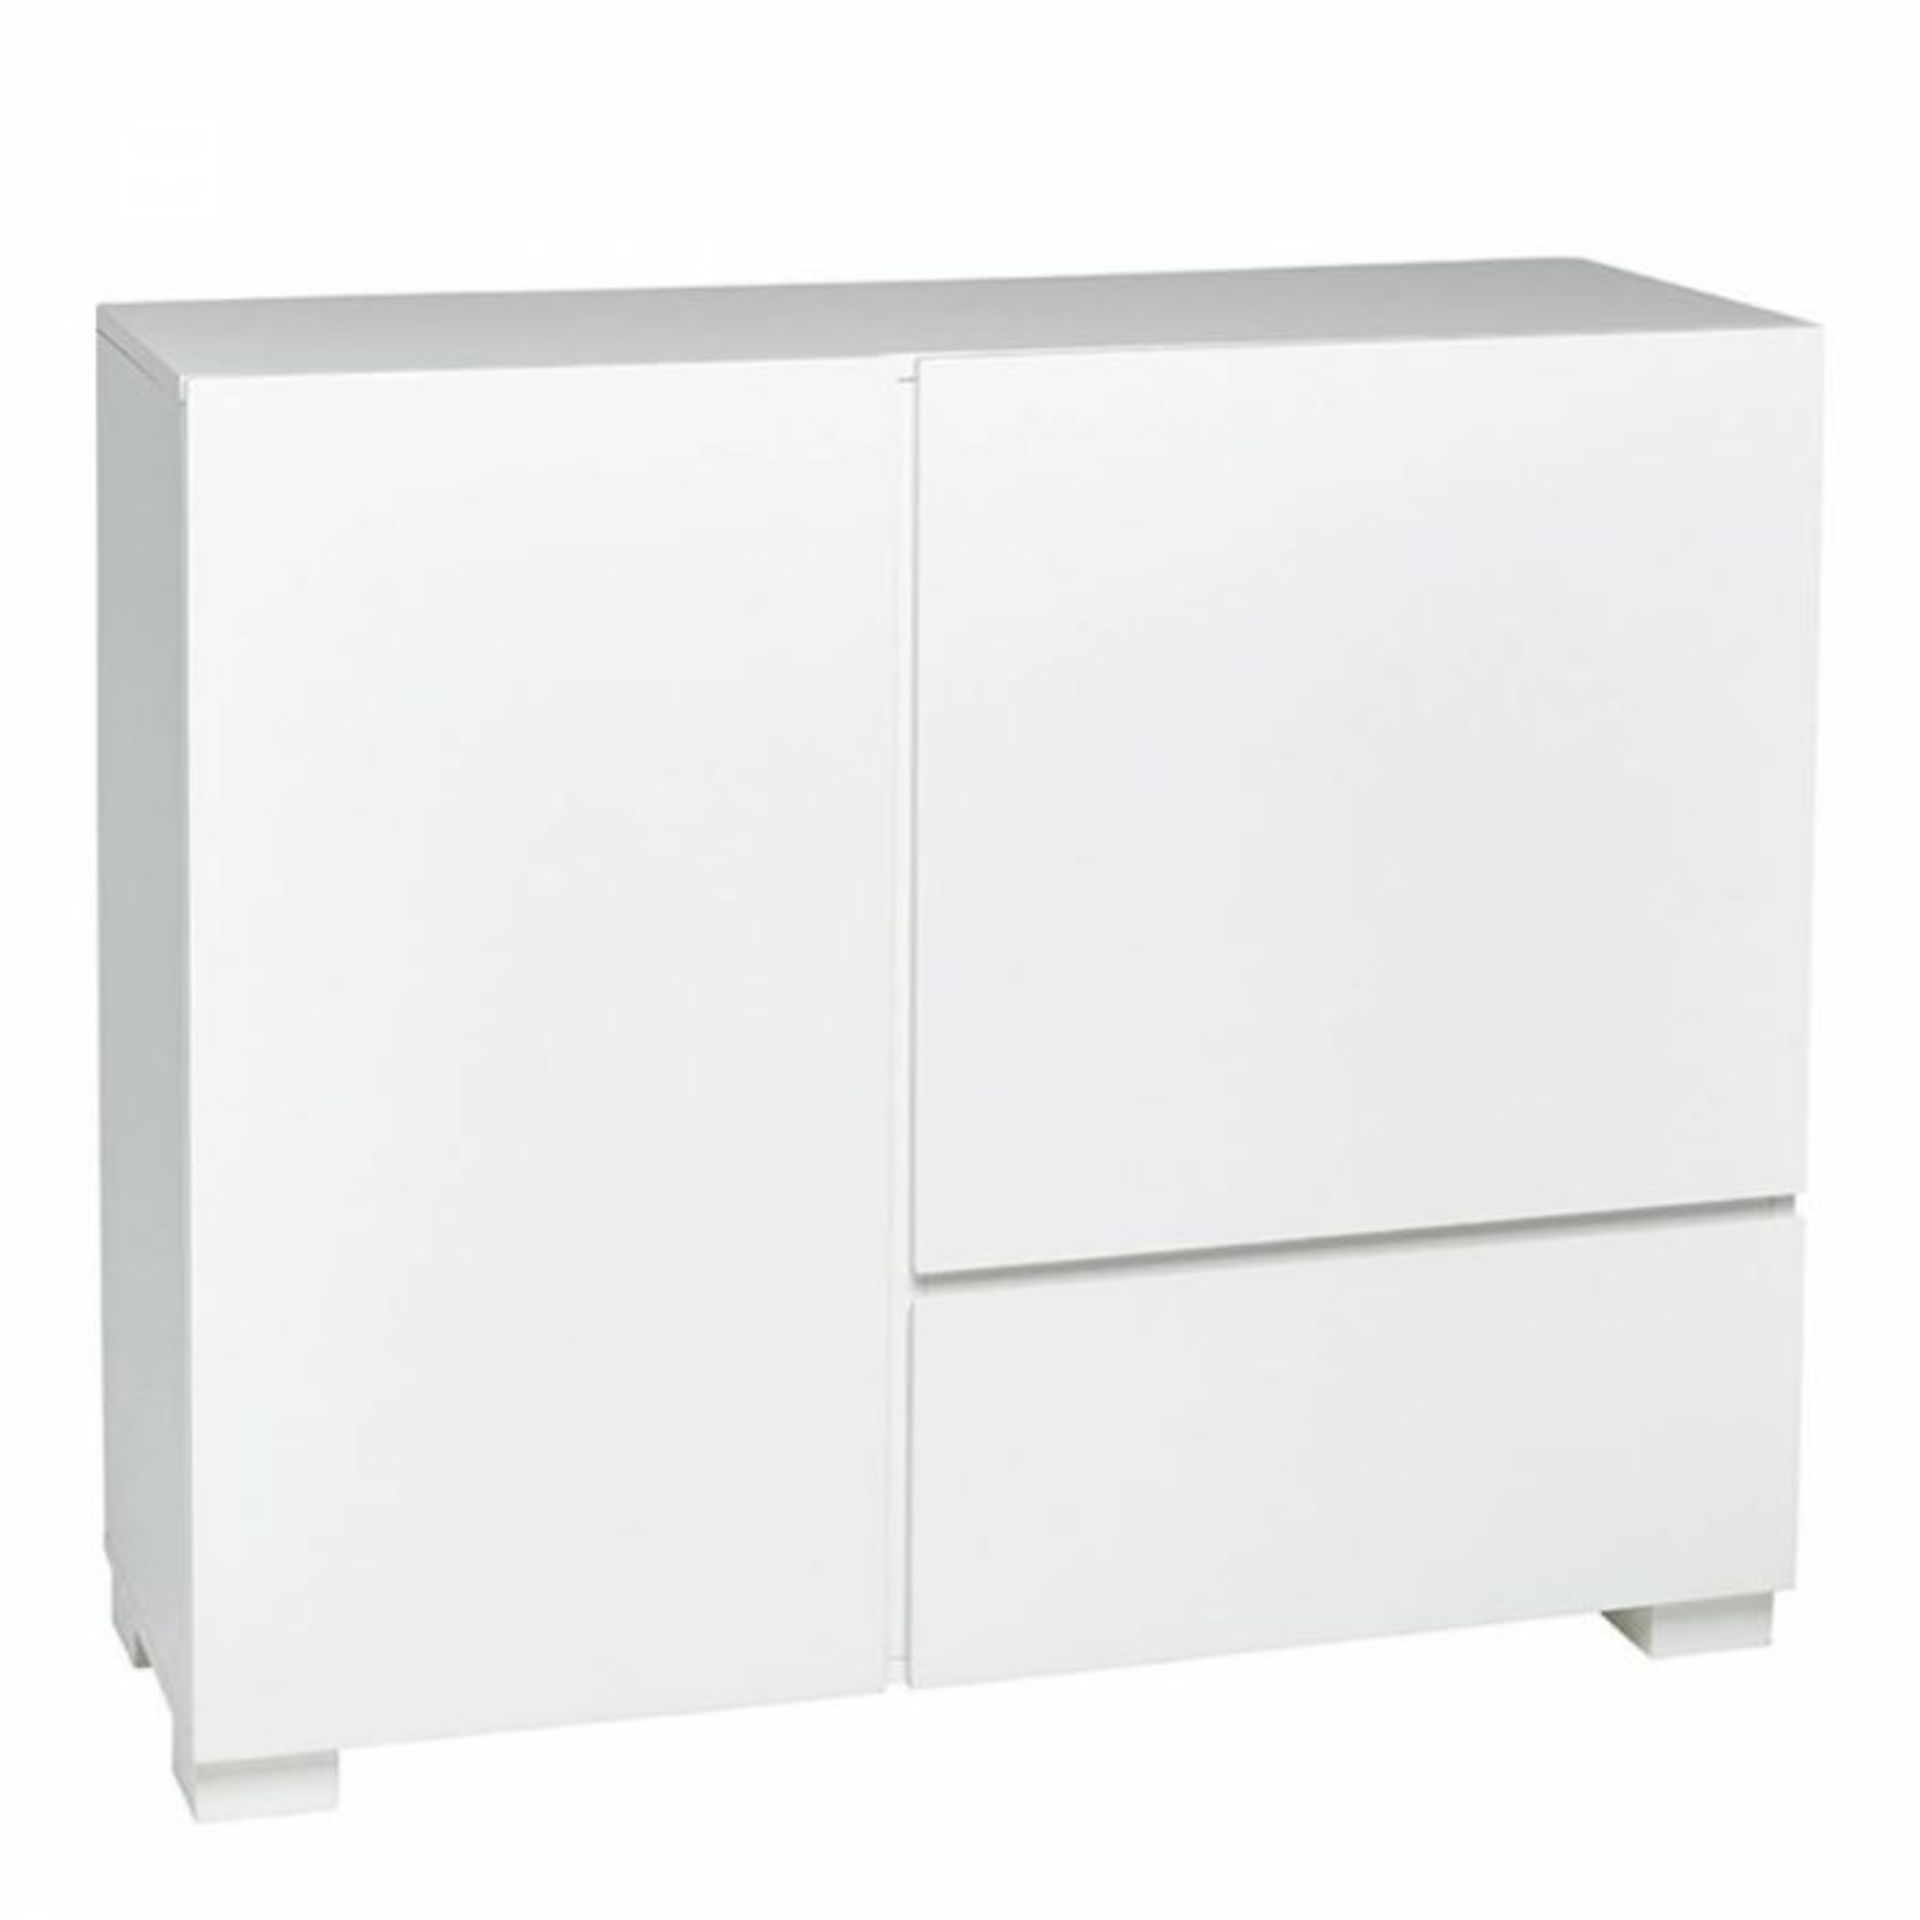 Dwell Olmo Square Gloss Sideboard White RRP ?769.00 Inspired by geometric shapes, this sideboard has - Image 4 of 4